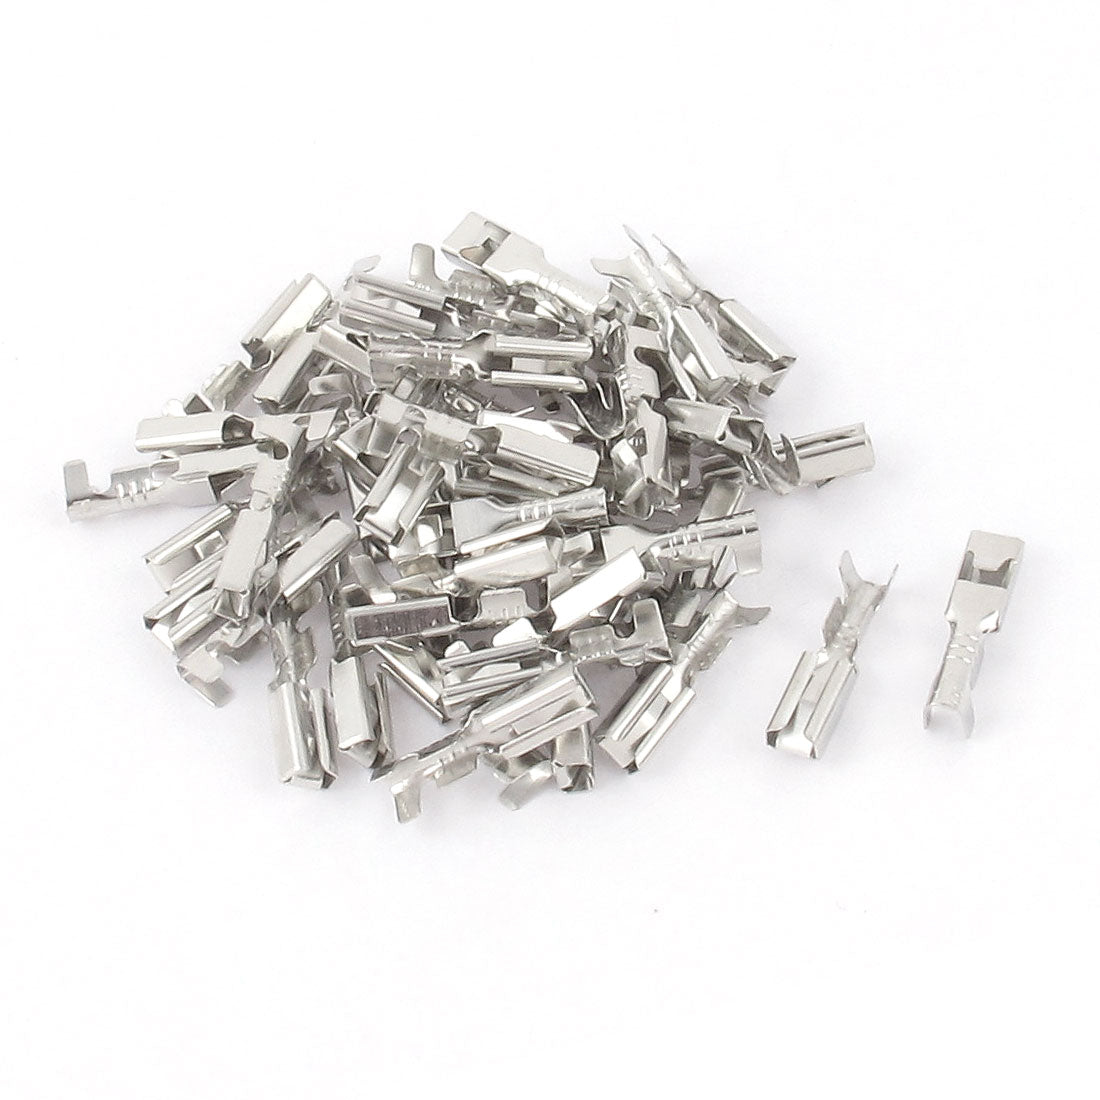 uxcell Uxcell 50Pcs 2.8mm Non Insulation Metal Female Crimp Spade Terminal Electrical Wire Connector